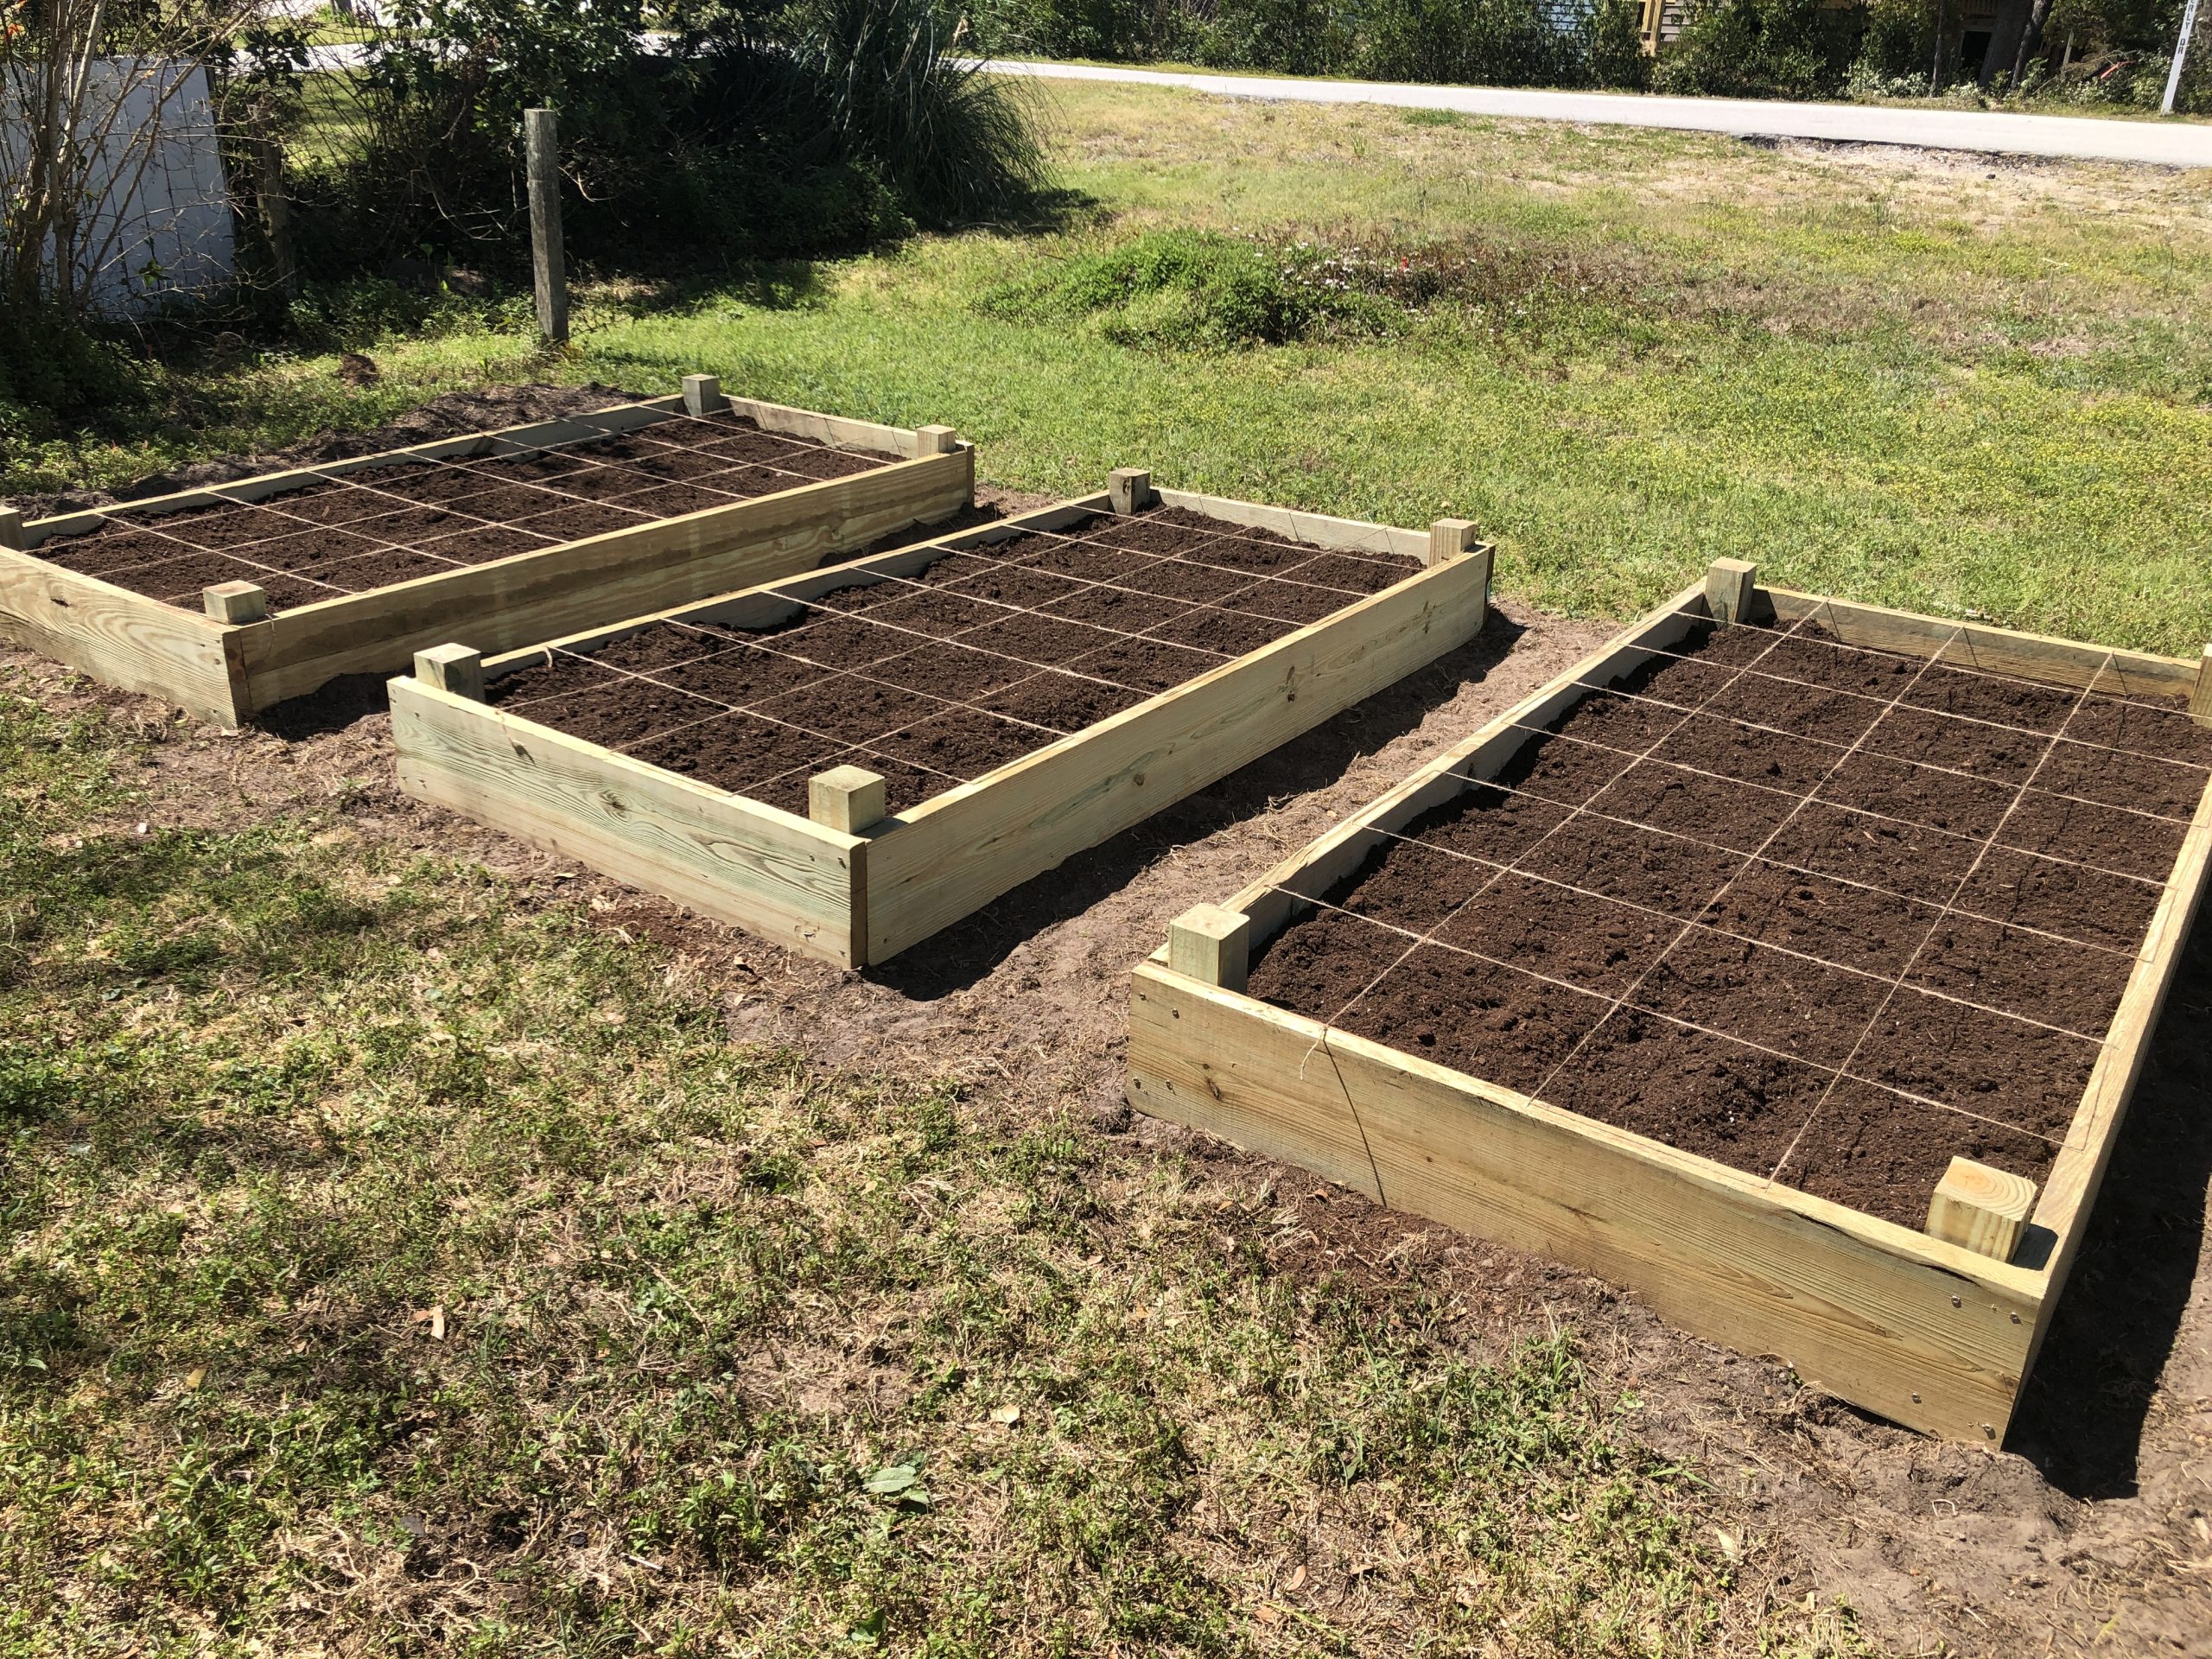 Raised beds marked off for square-foot gardening